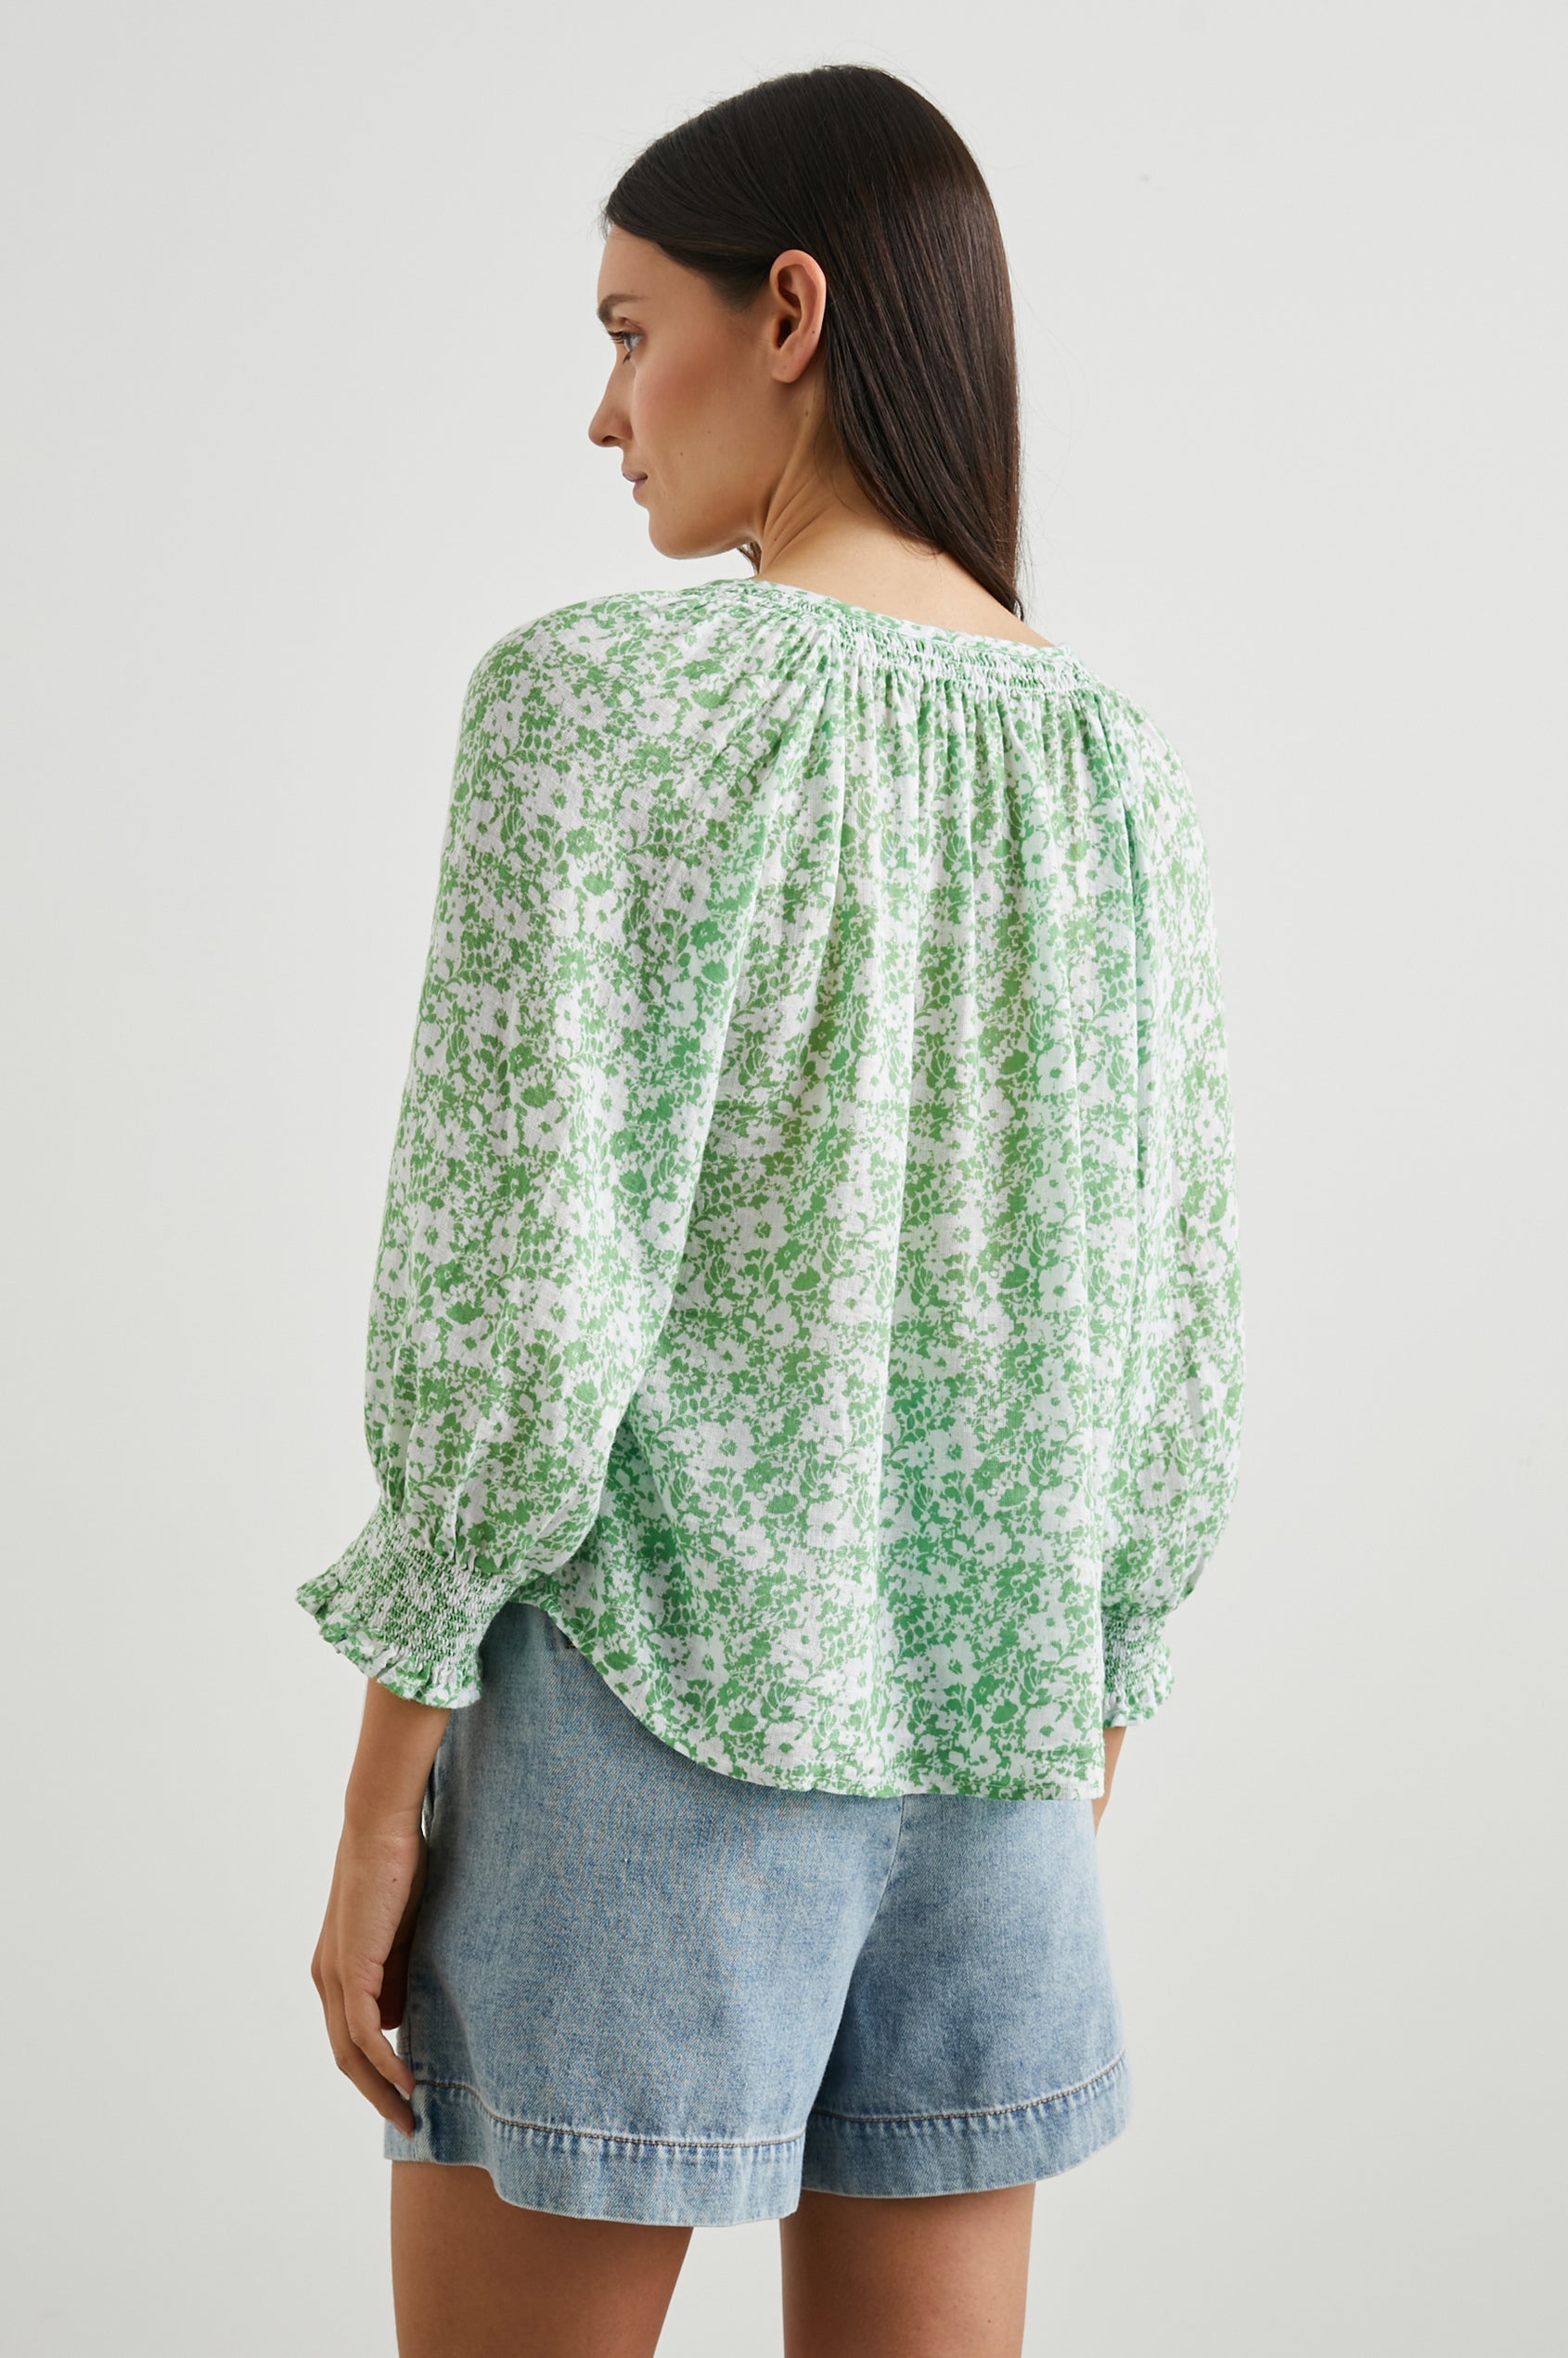 Mariah Top in Green Texture Floral